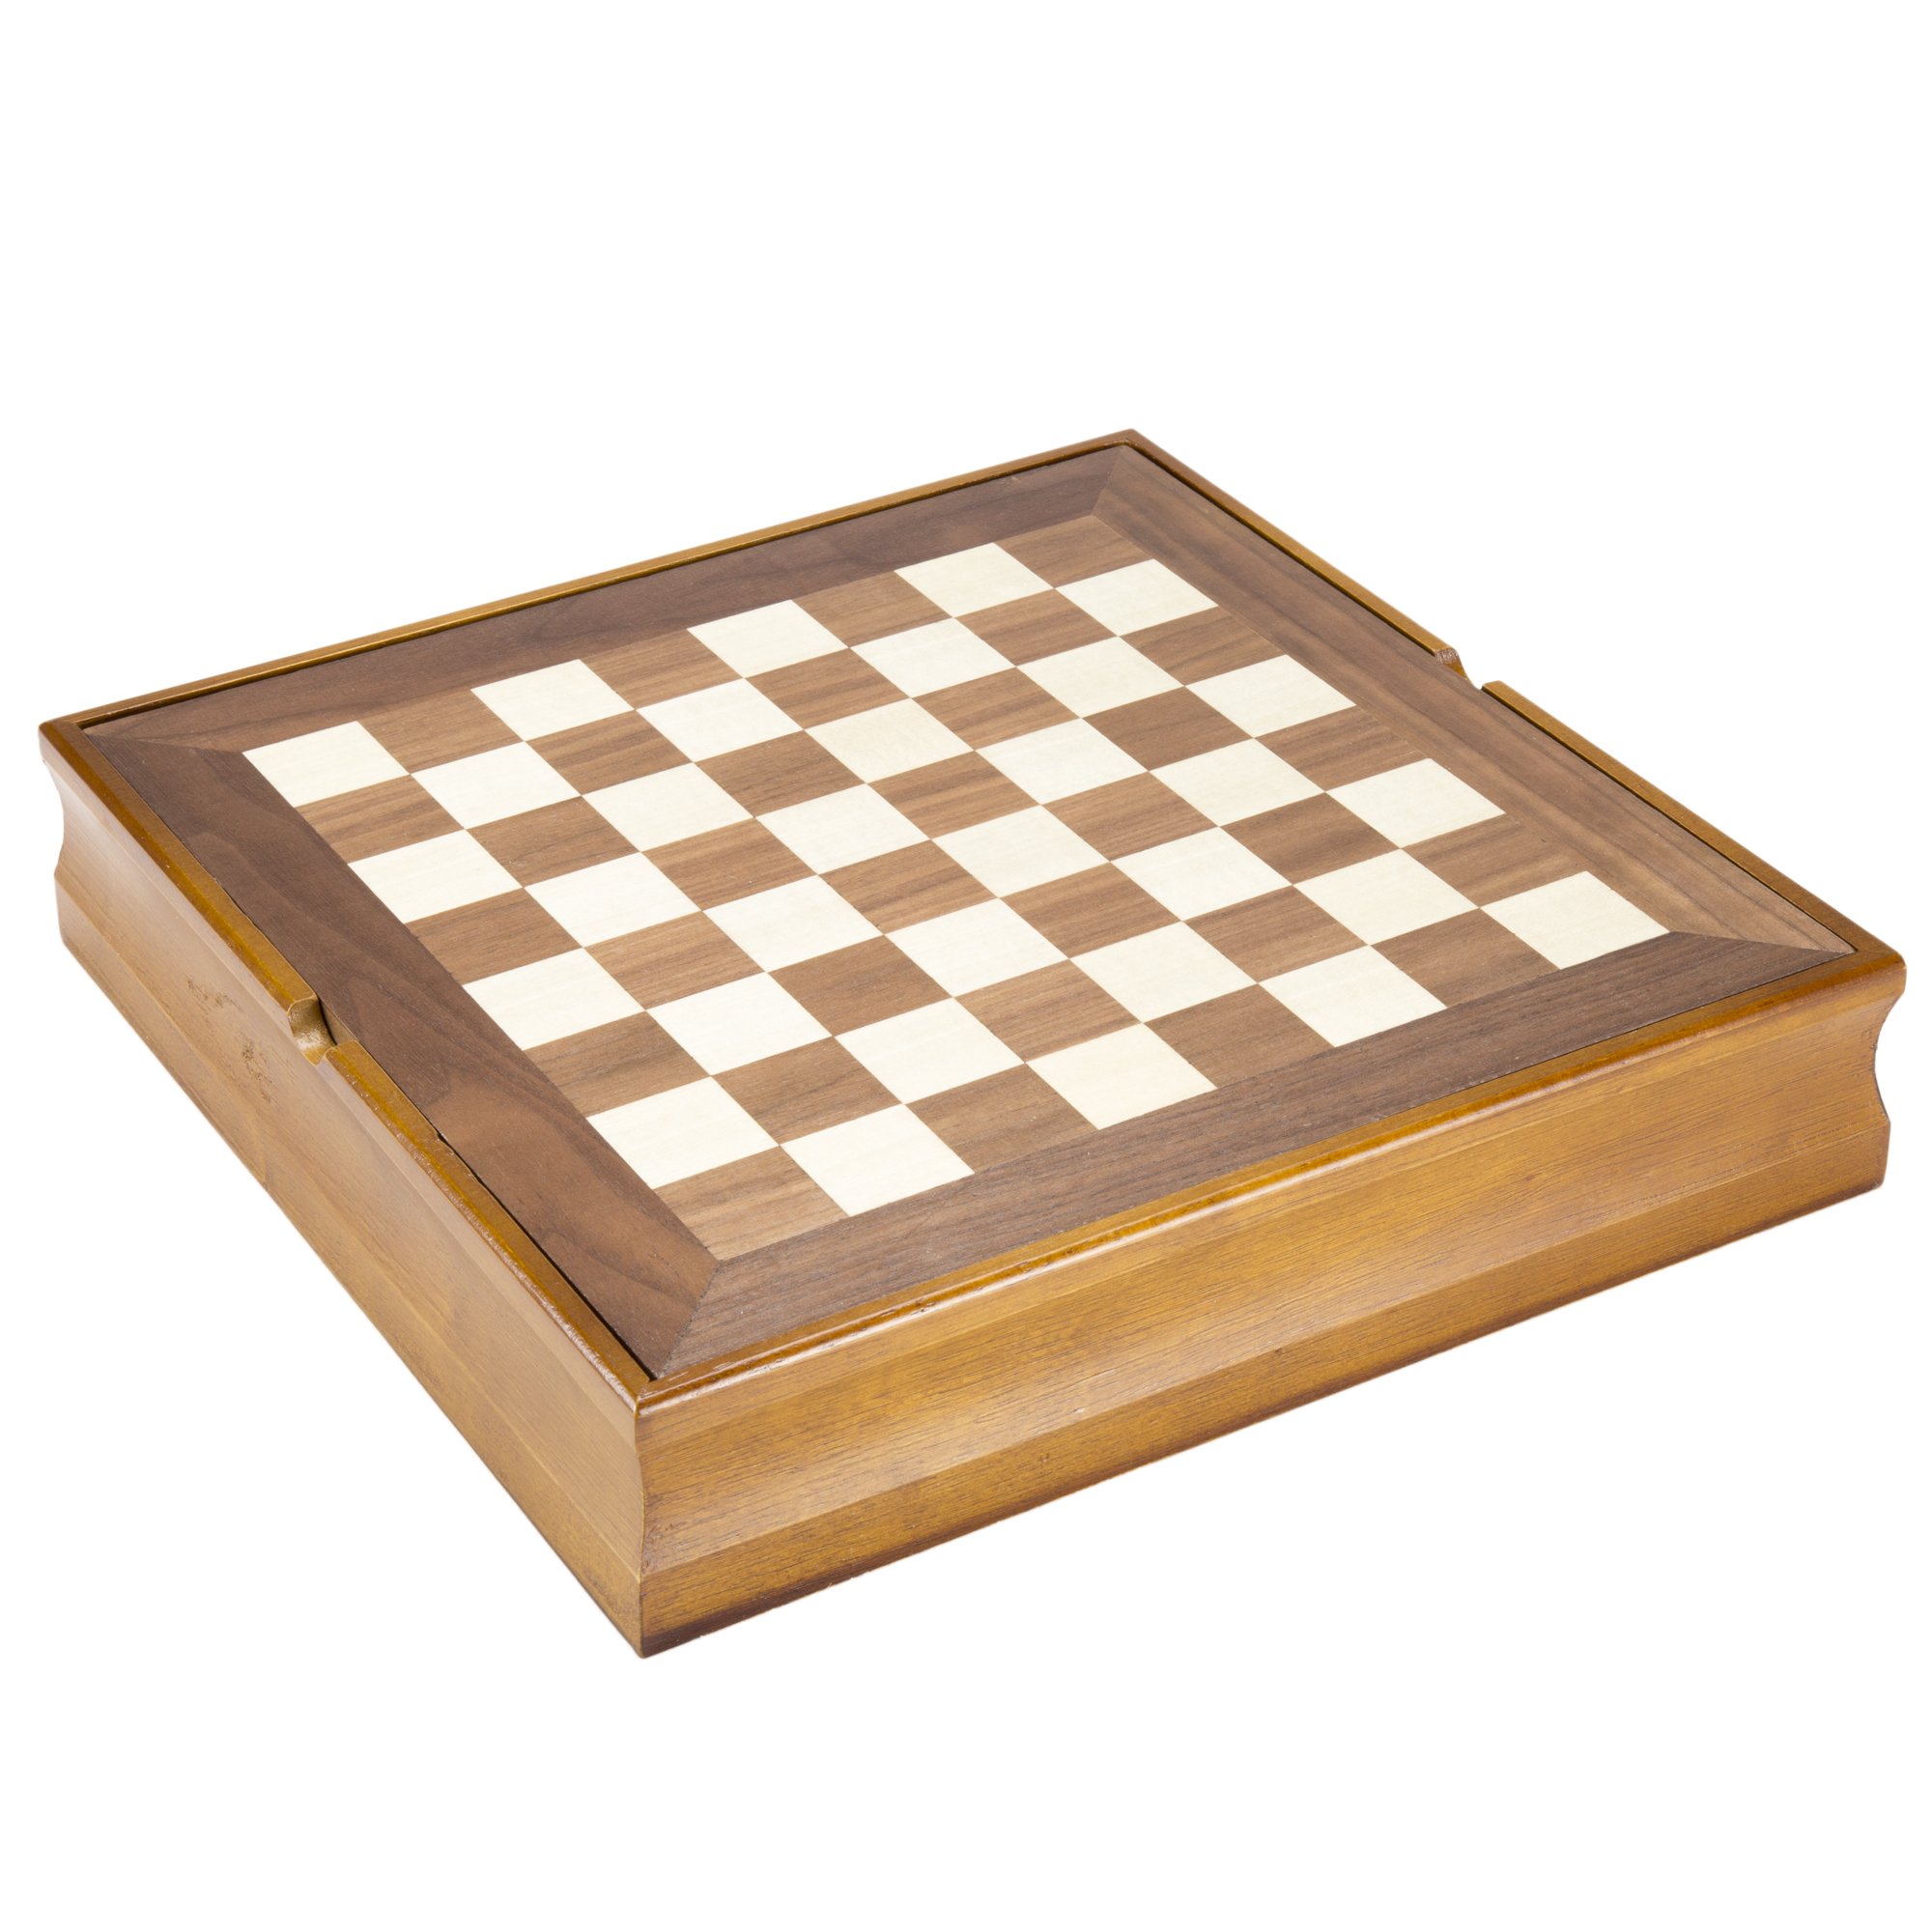 Wood Chess 7 Games in1 Combo Set with Chess, Checkers, Cribbage, Backgammon, Dominos, Poker & Dice - Includes Bonus Deck of Cards!